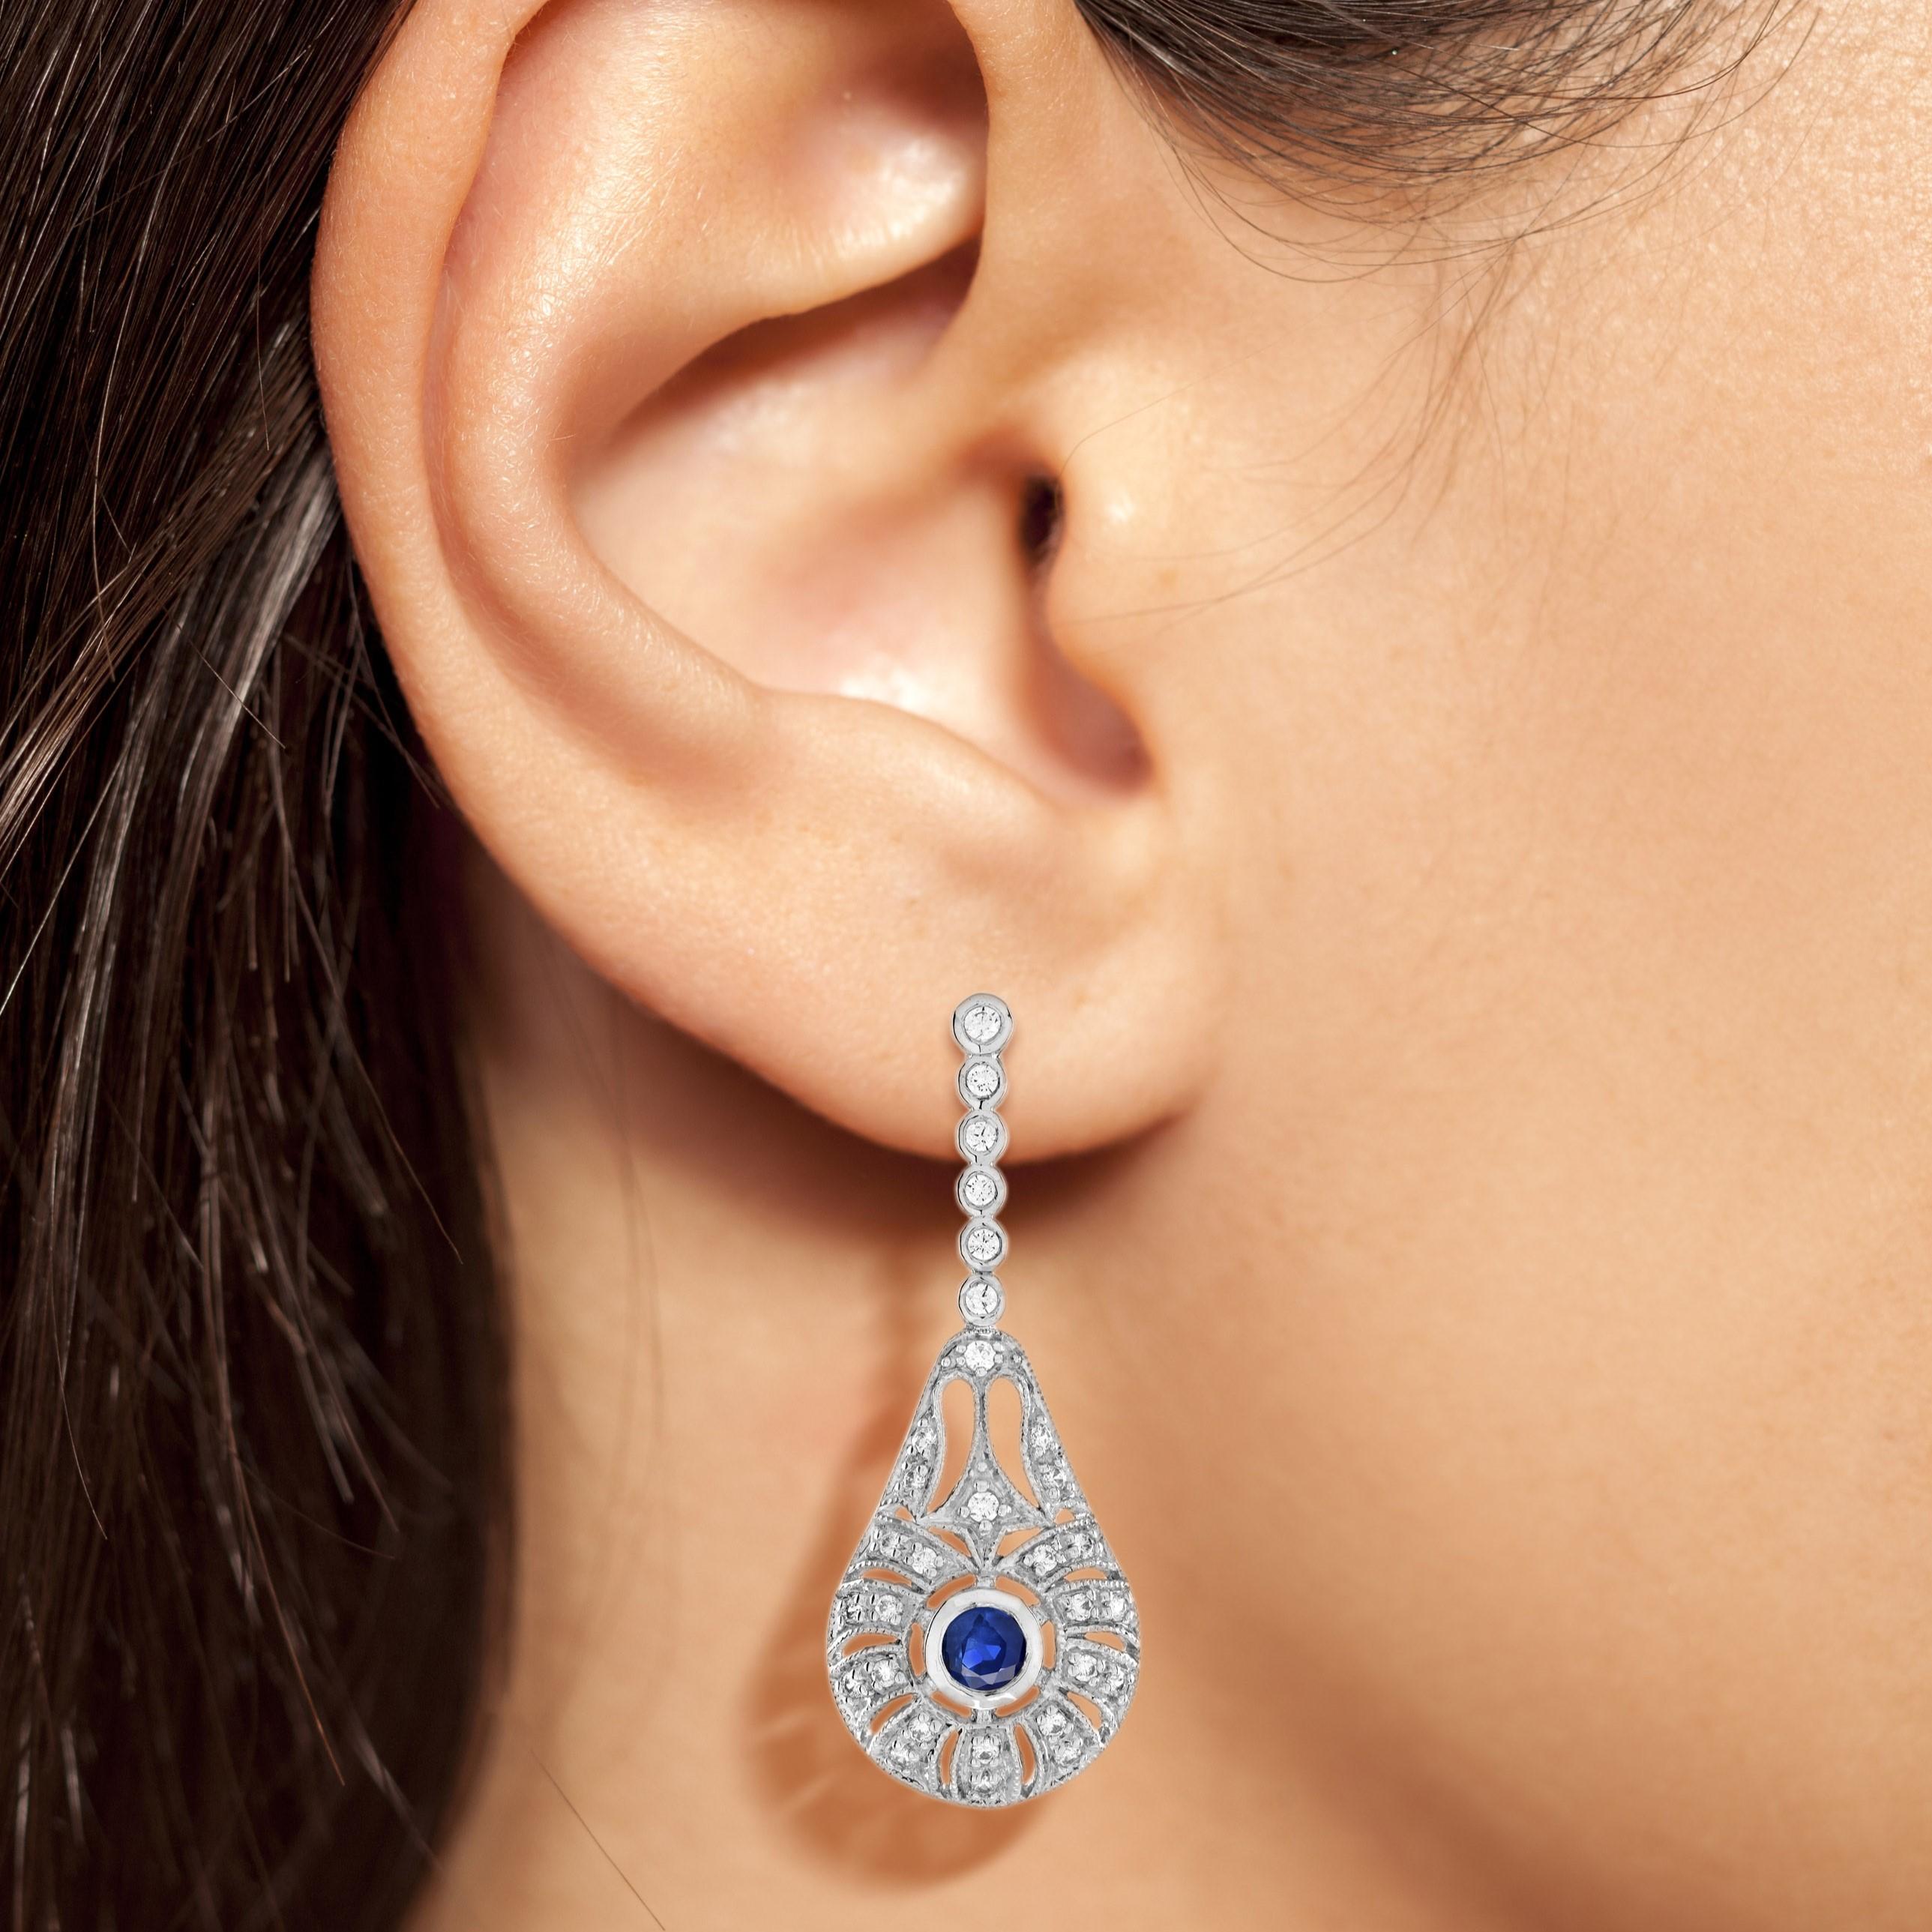 These elegant blue sapphire and diamond earrings bring the glamour with a chic and sophisticated Art Deco style design! The blue sapphire stands our beautifully in the center. The setting is encrusted with vibrant diamonds. These timeless glamorous